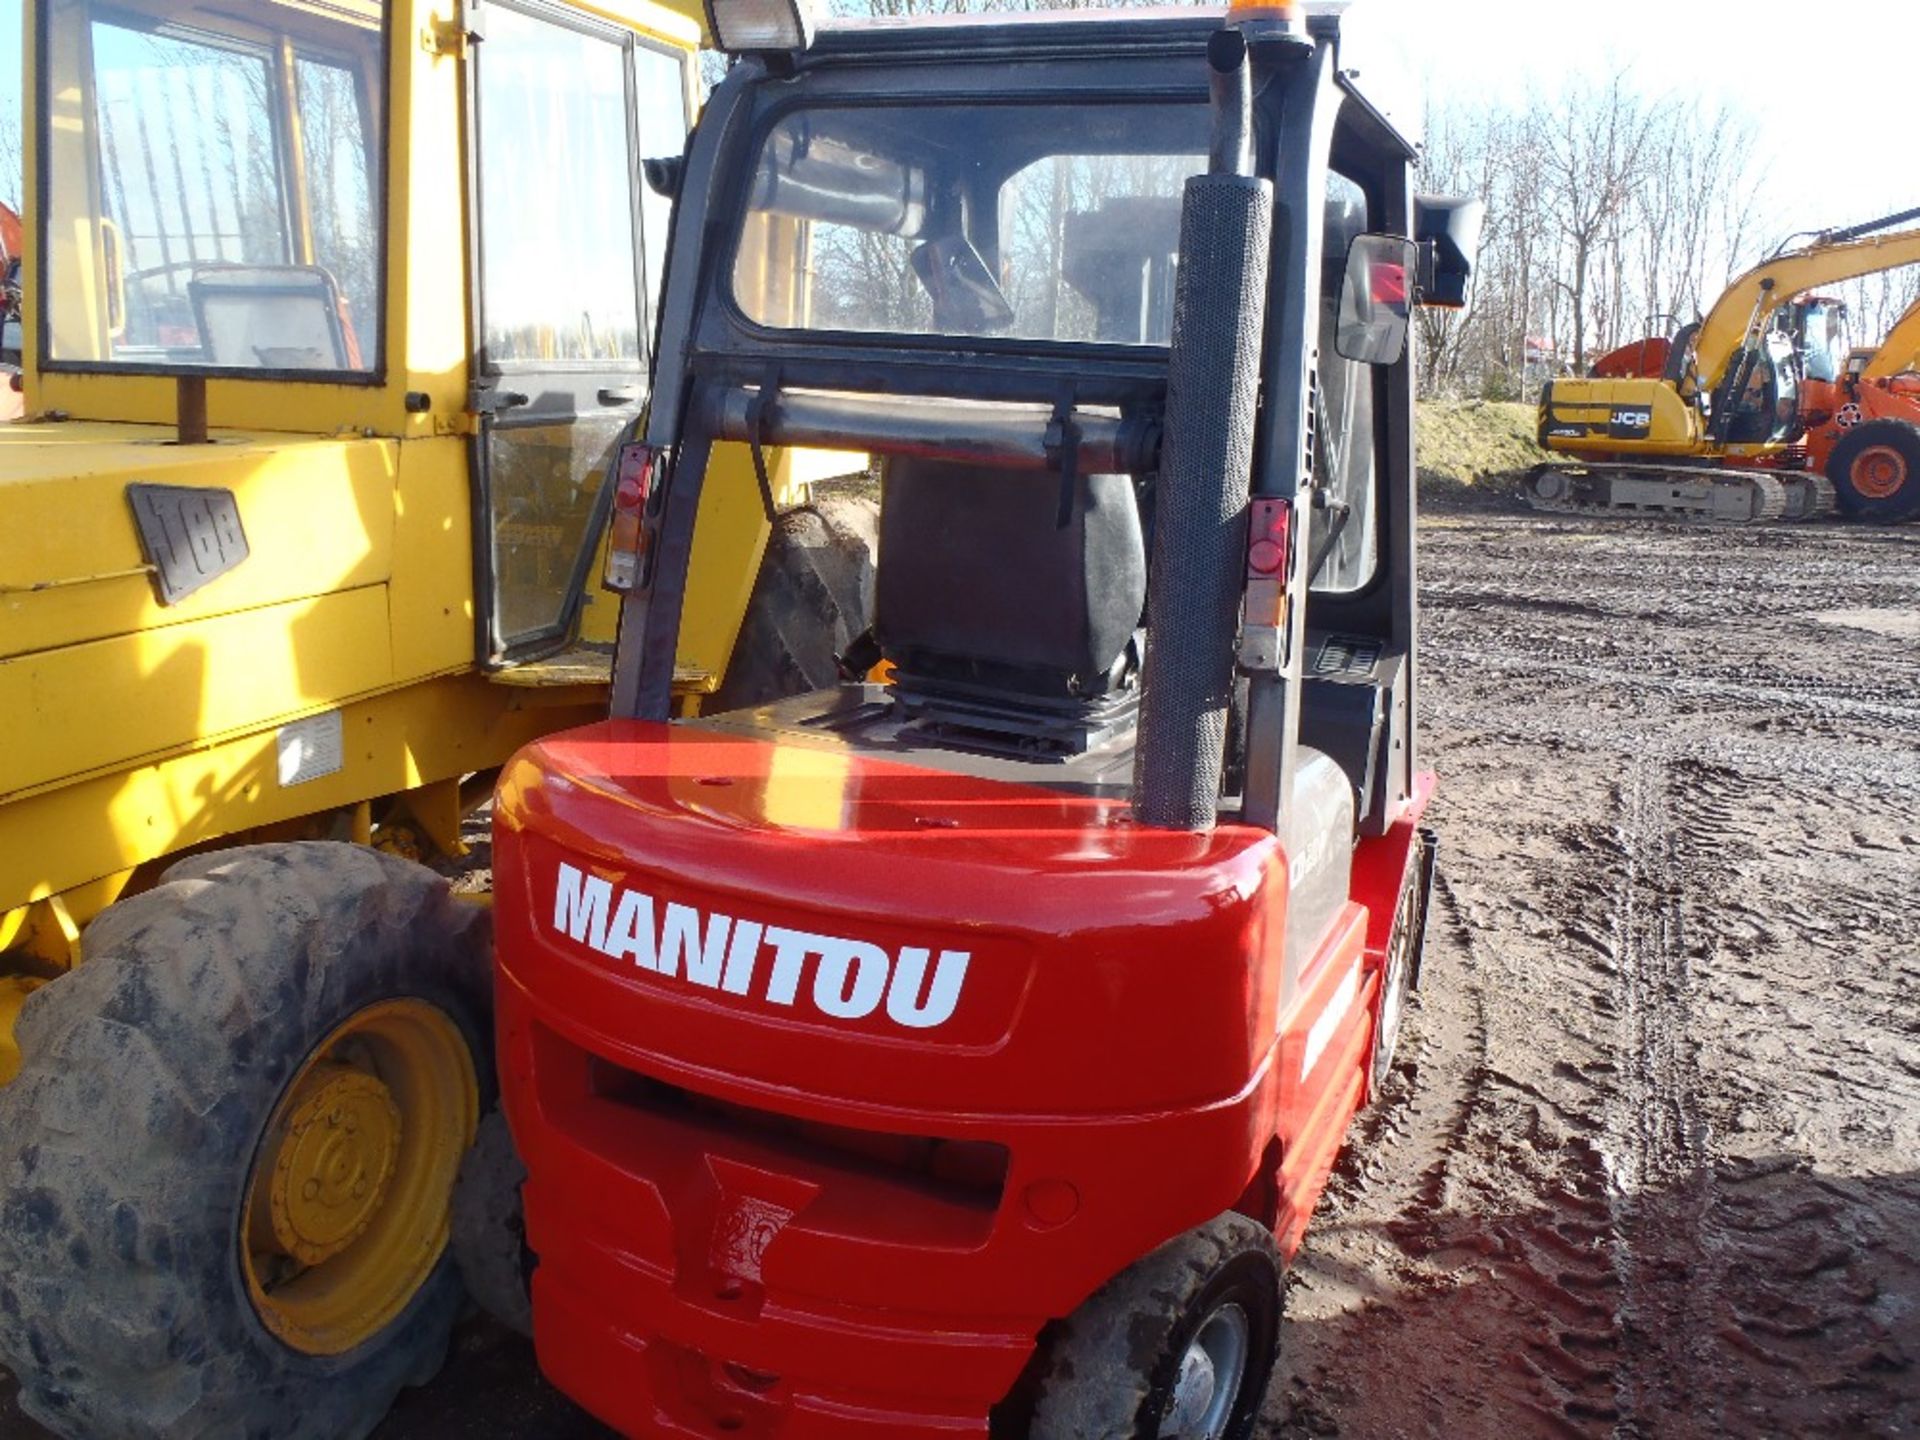 Manitou CD20P Forklift with 3 Stage Free Lift Mast, Side Shift, Forks. Serial No. 850552 - Image 4 of 4